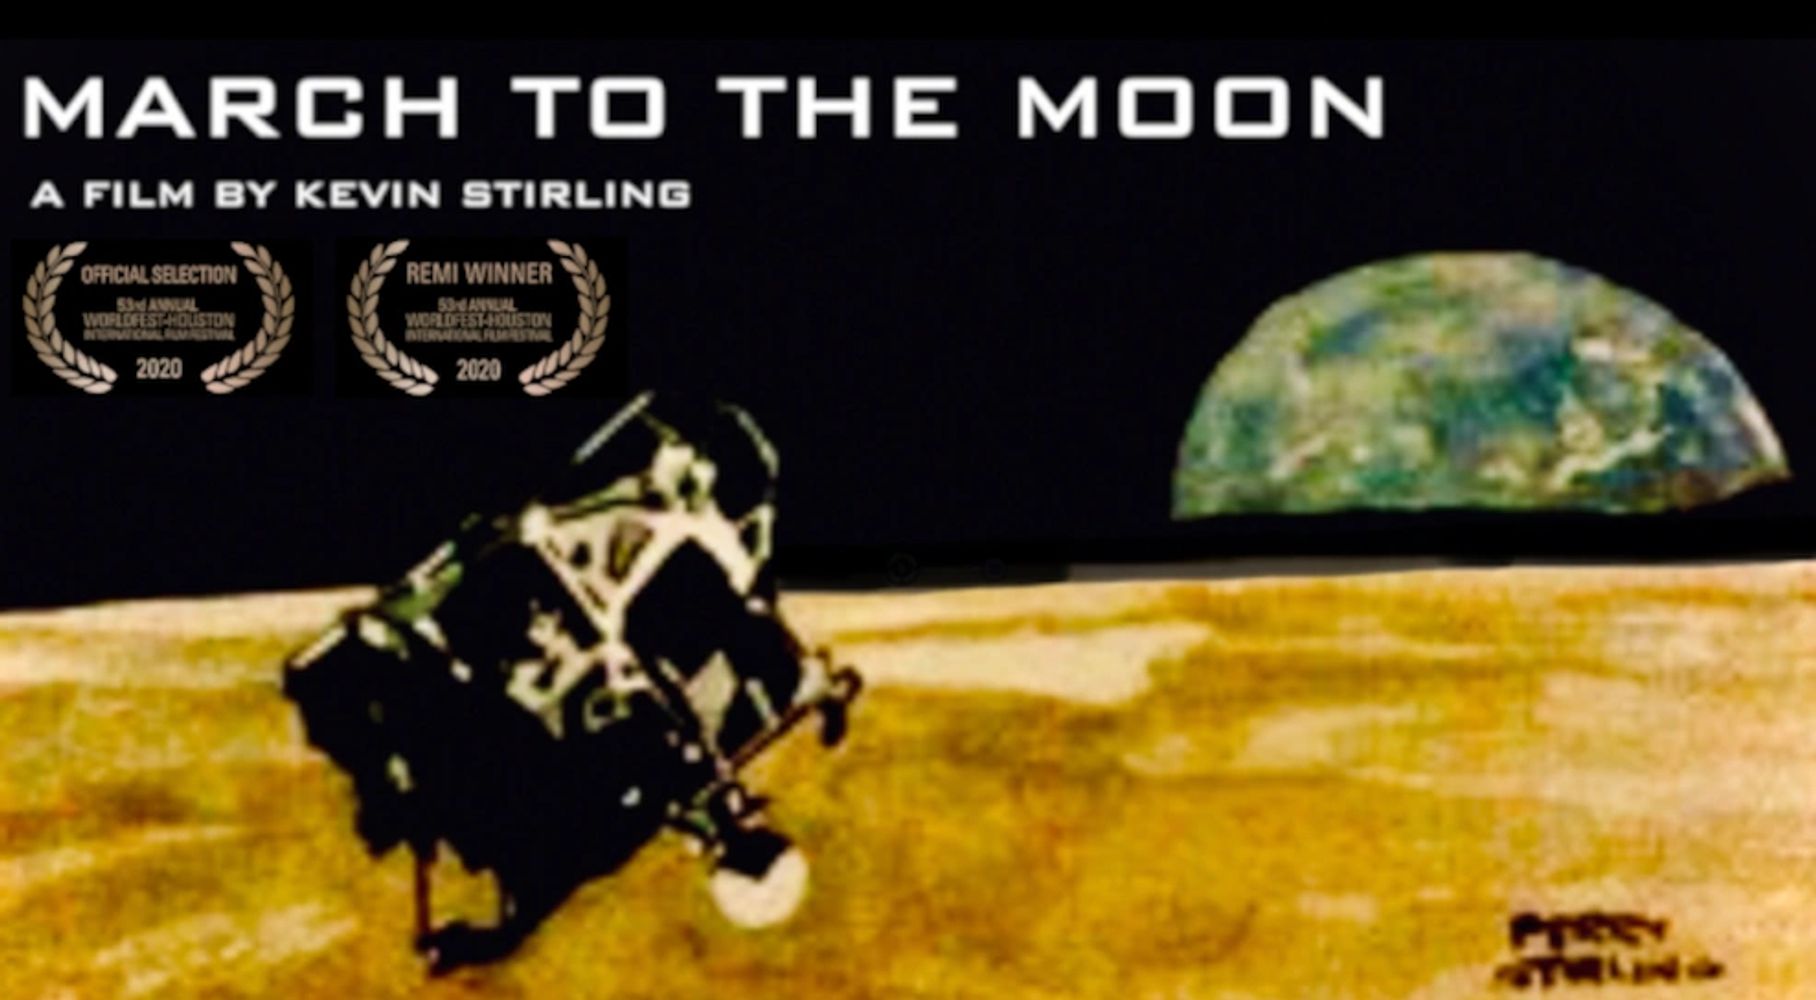 MARCH TO THE MOON MOVIE POSTER